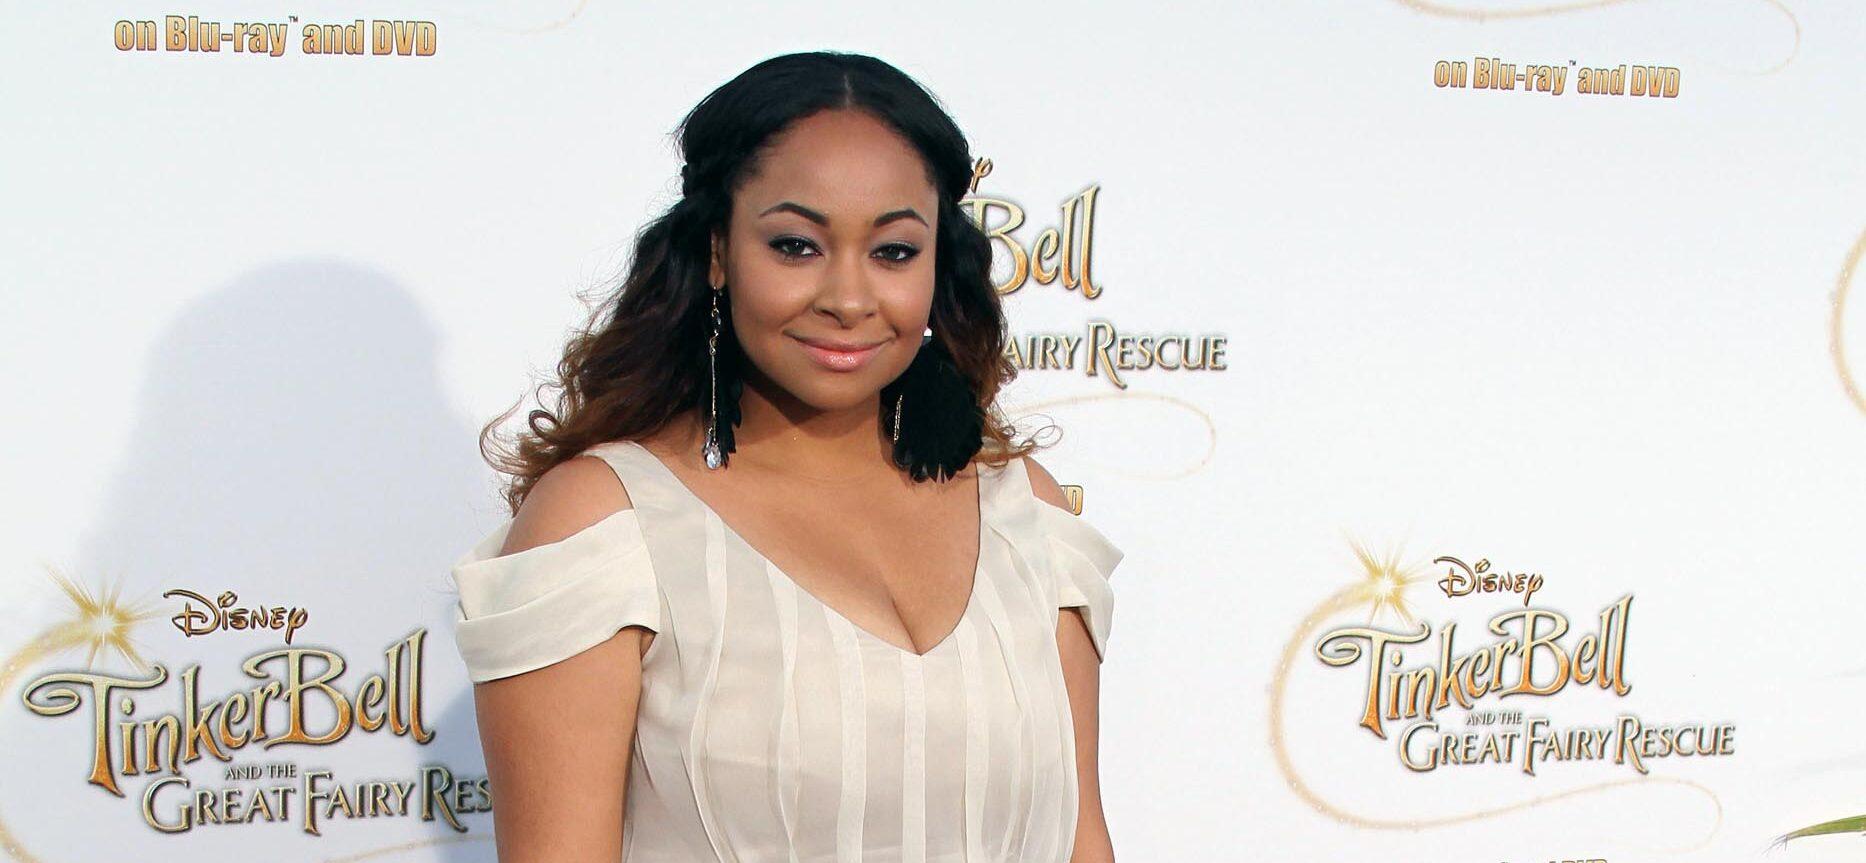 Raven Symone at PICNIC IN THE PARK PREMIERE OF TINKERBELL IN BEVERLY HILLS